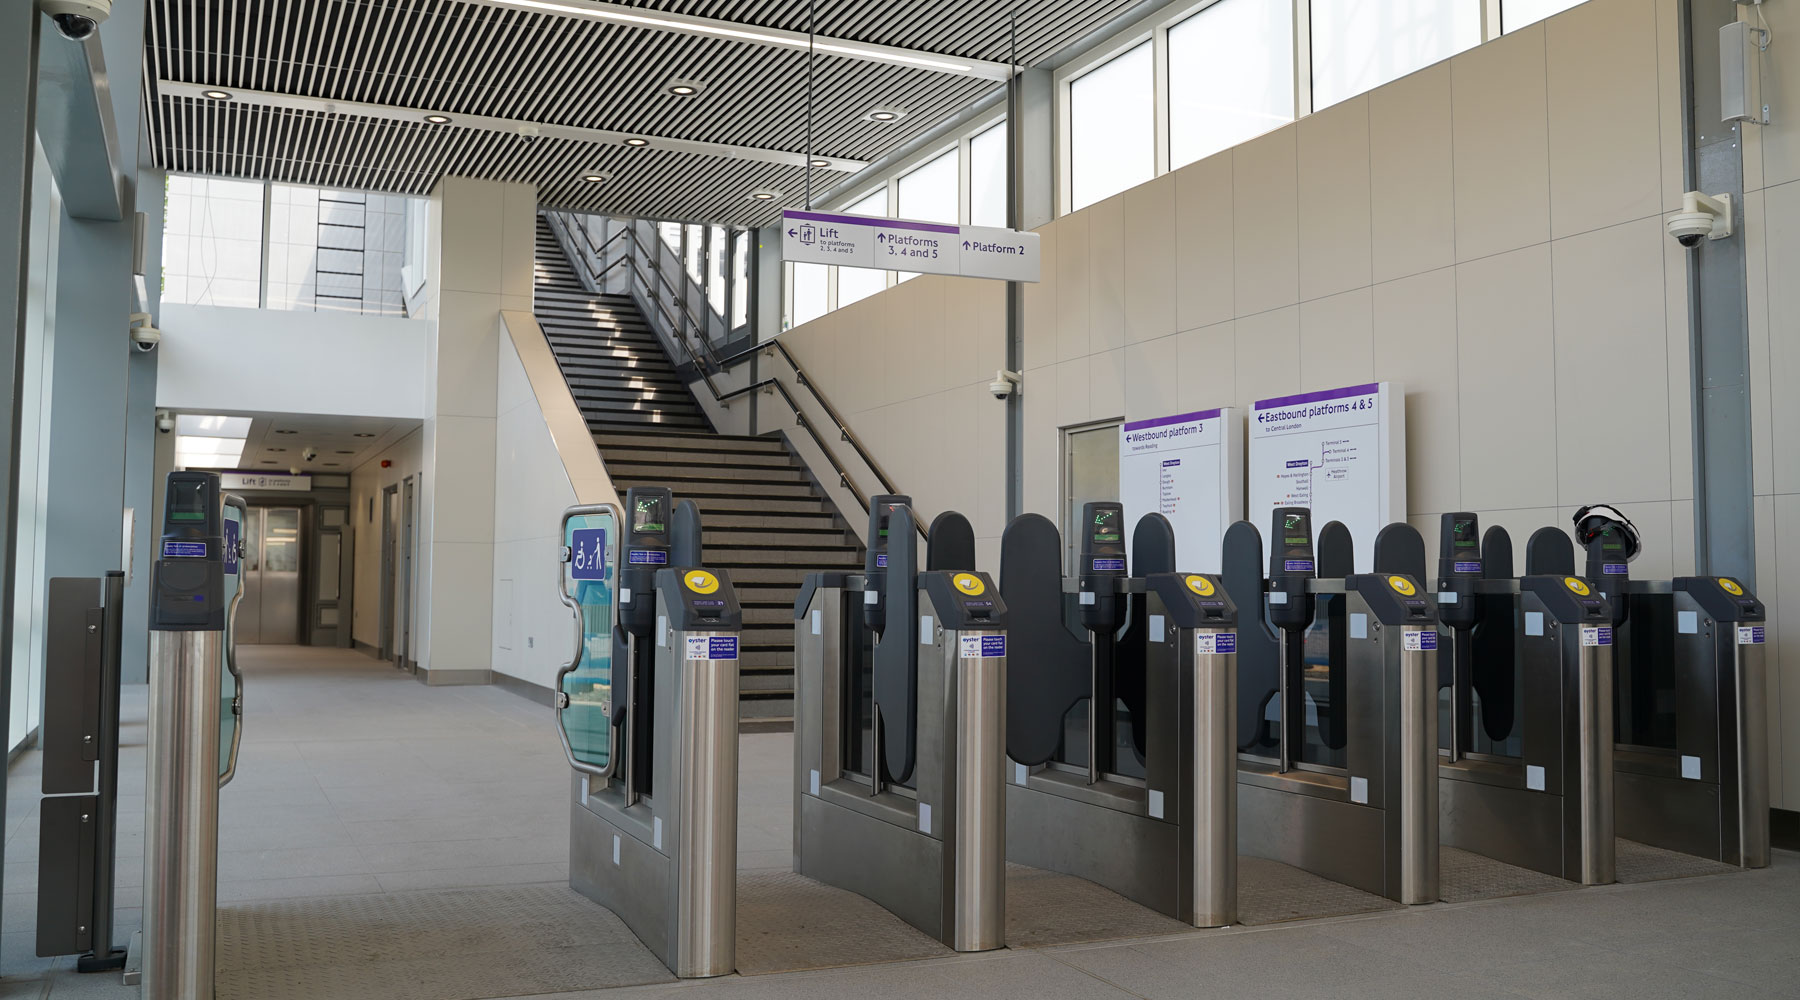 West Drayton station gets step-free access and larger ticket hall